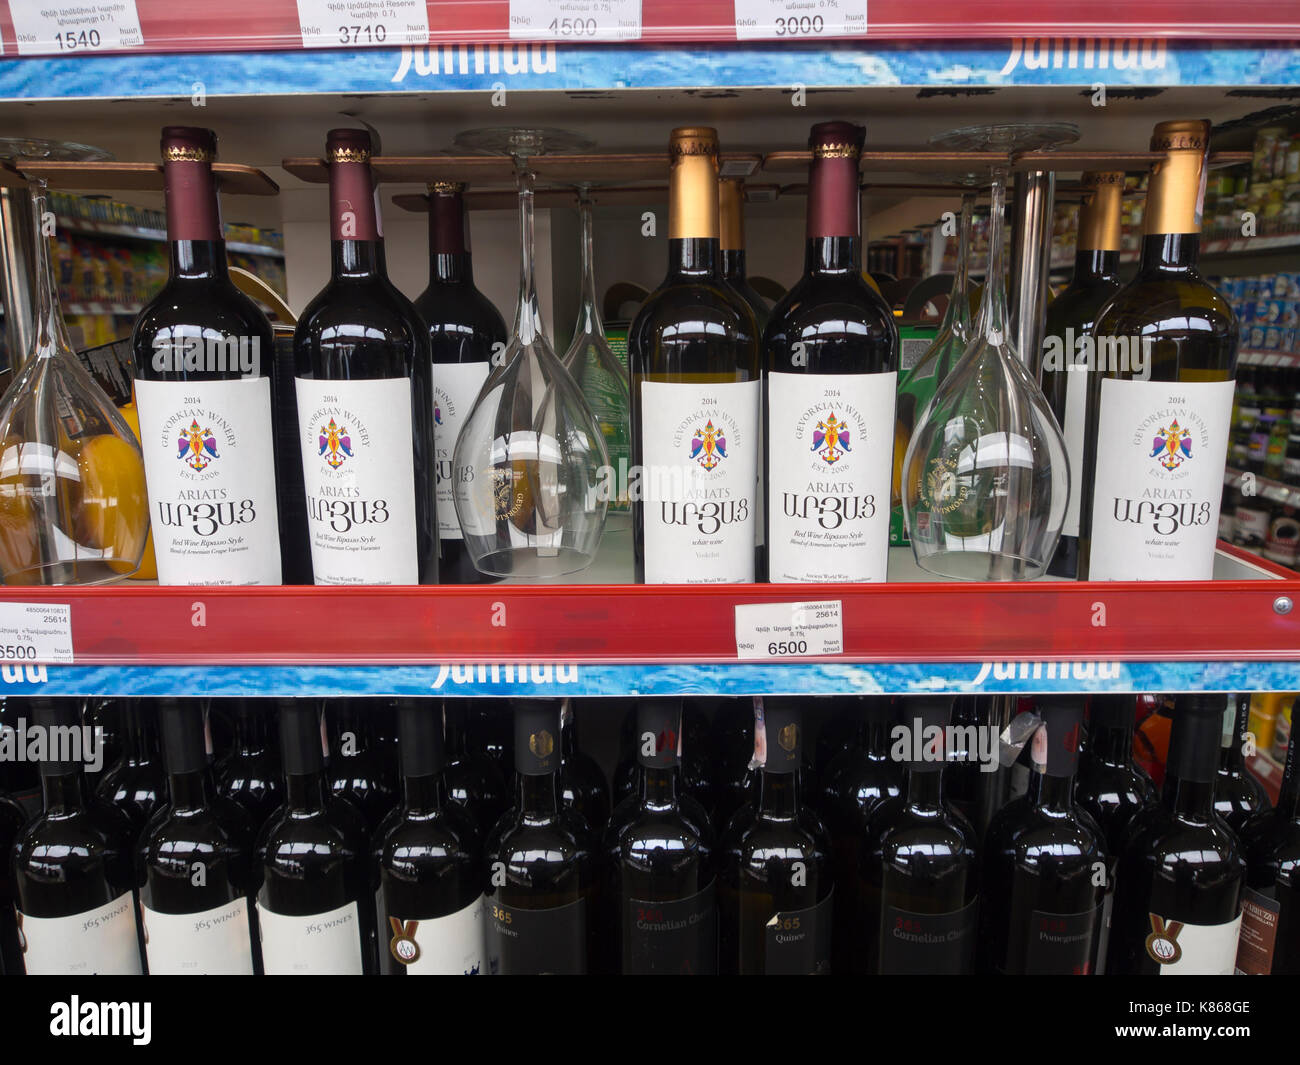 Aparan, a small town in Armenia, well known by travellers for the Gntunik Bakery and Supermarket, a bottles of Armenian brandy and wine for sale Stock Photo